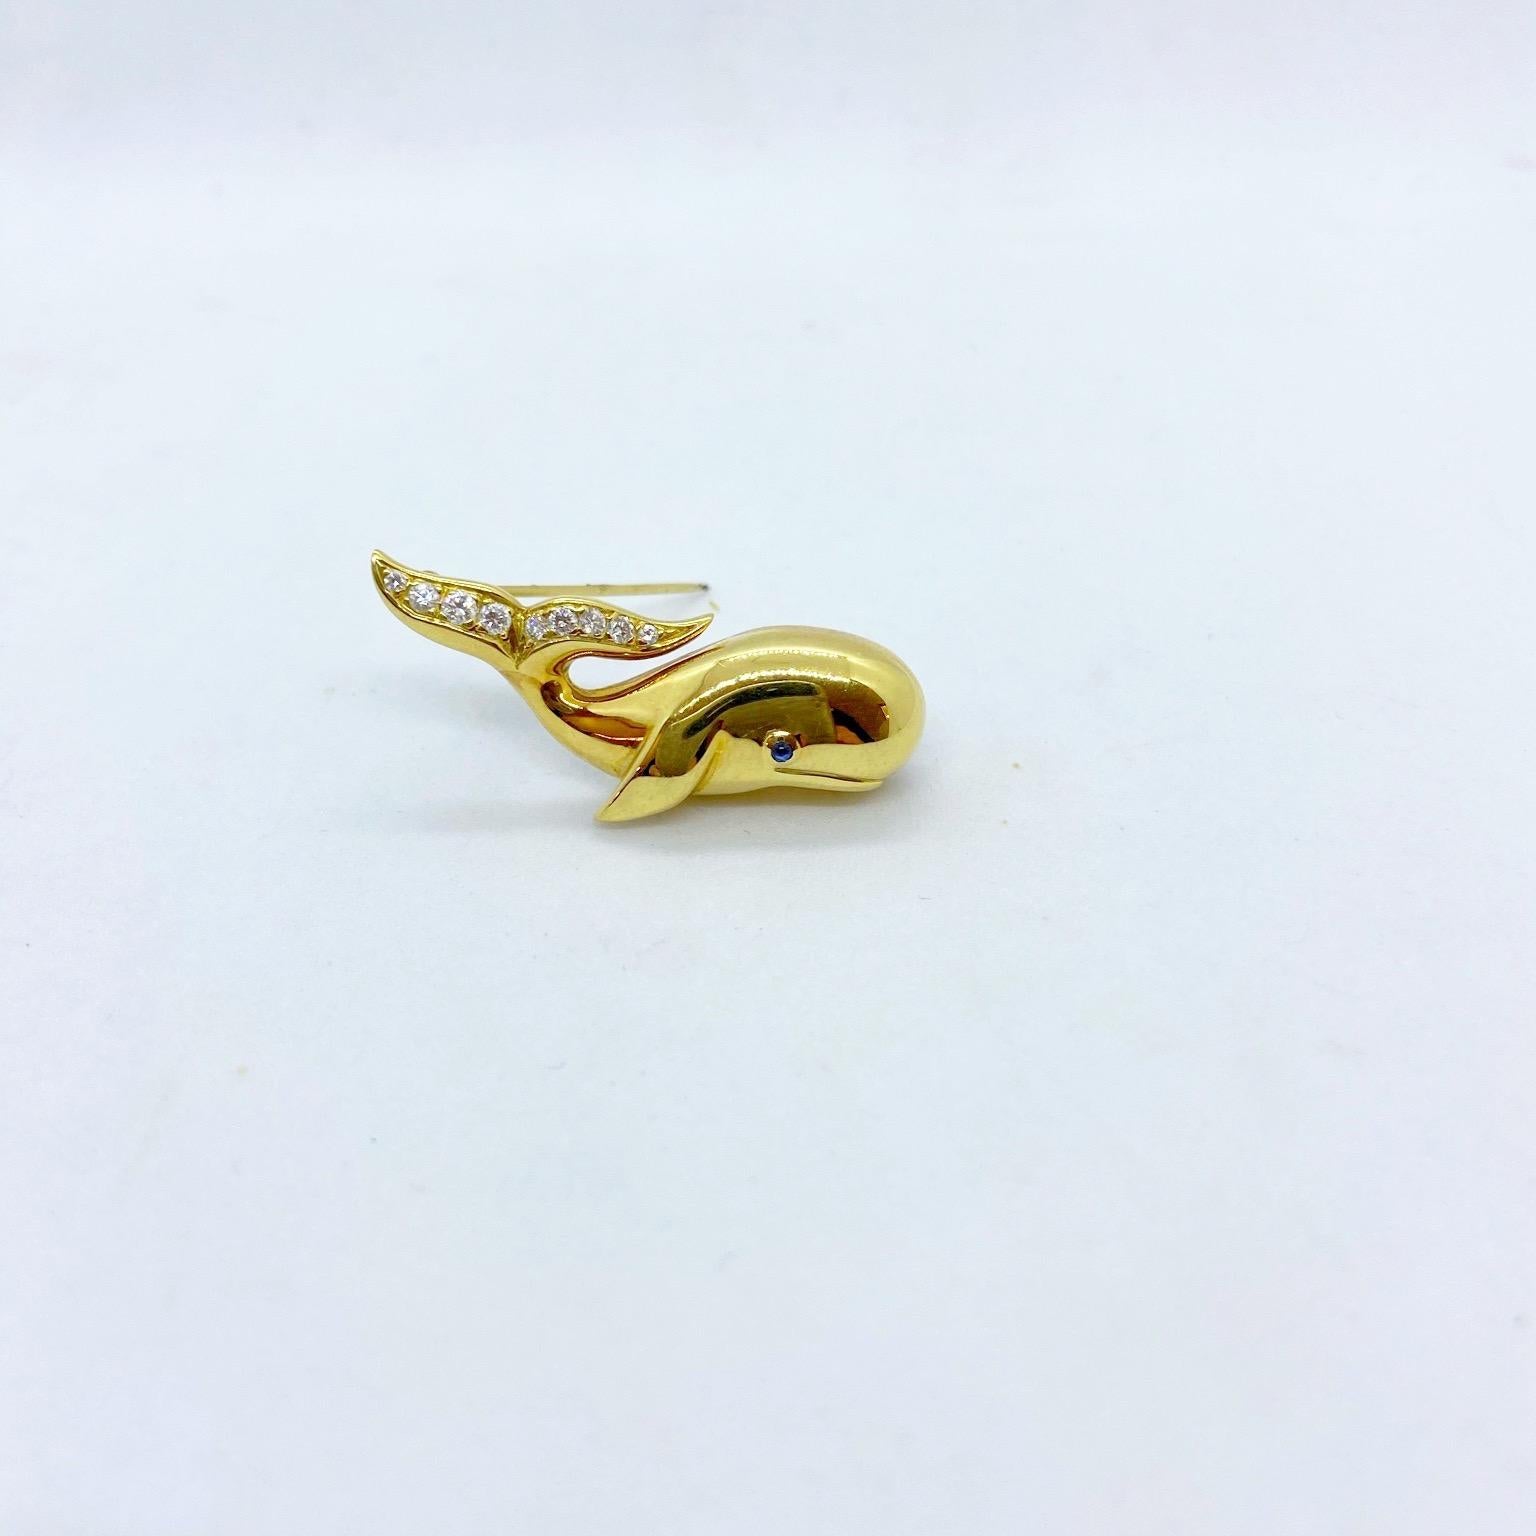 An adorable whale brooch crafted in a hi-polished 18 karat yellow gold. The smiling whale has a blue sapphire eye and a tail set with 0.23 carats of round brilliant diamonds. The whale measures 1.5